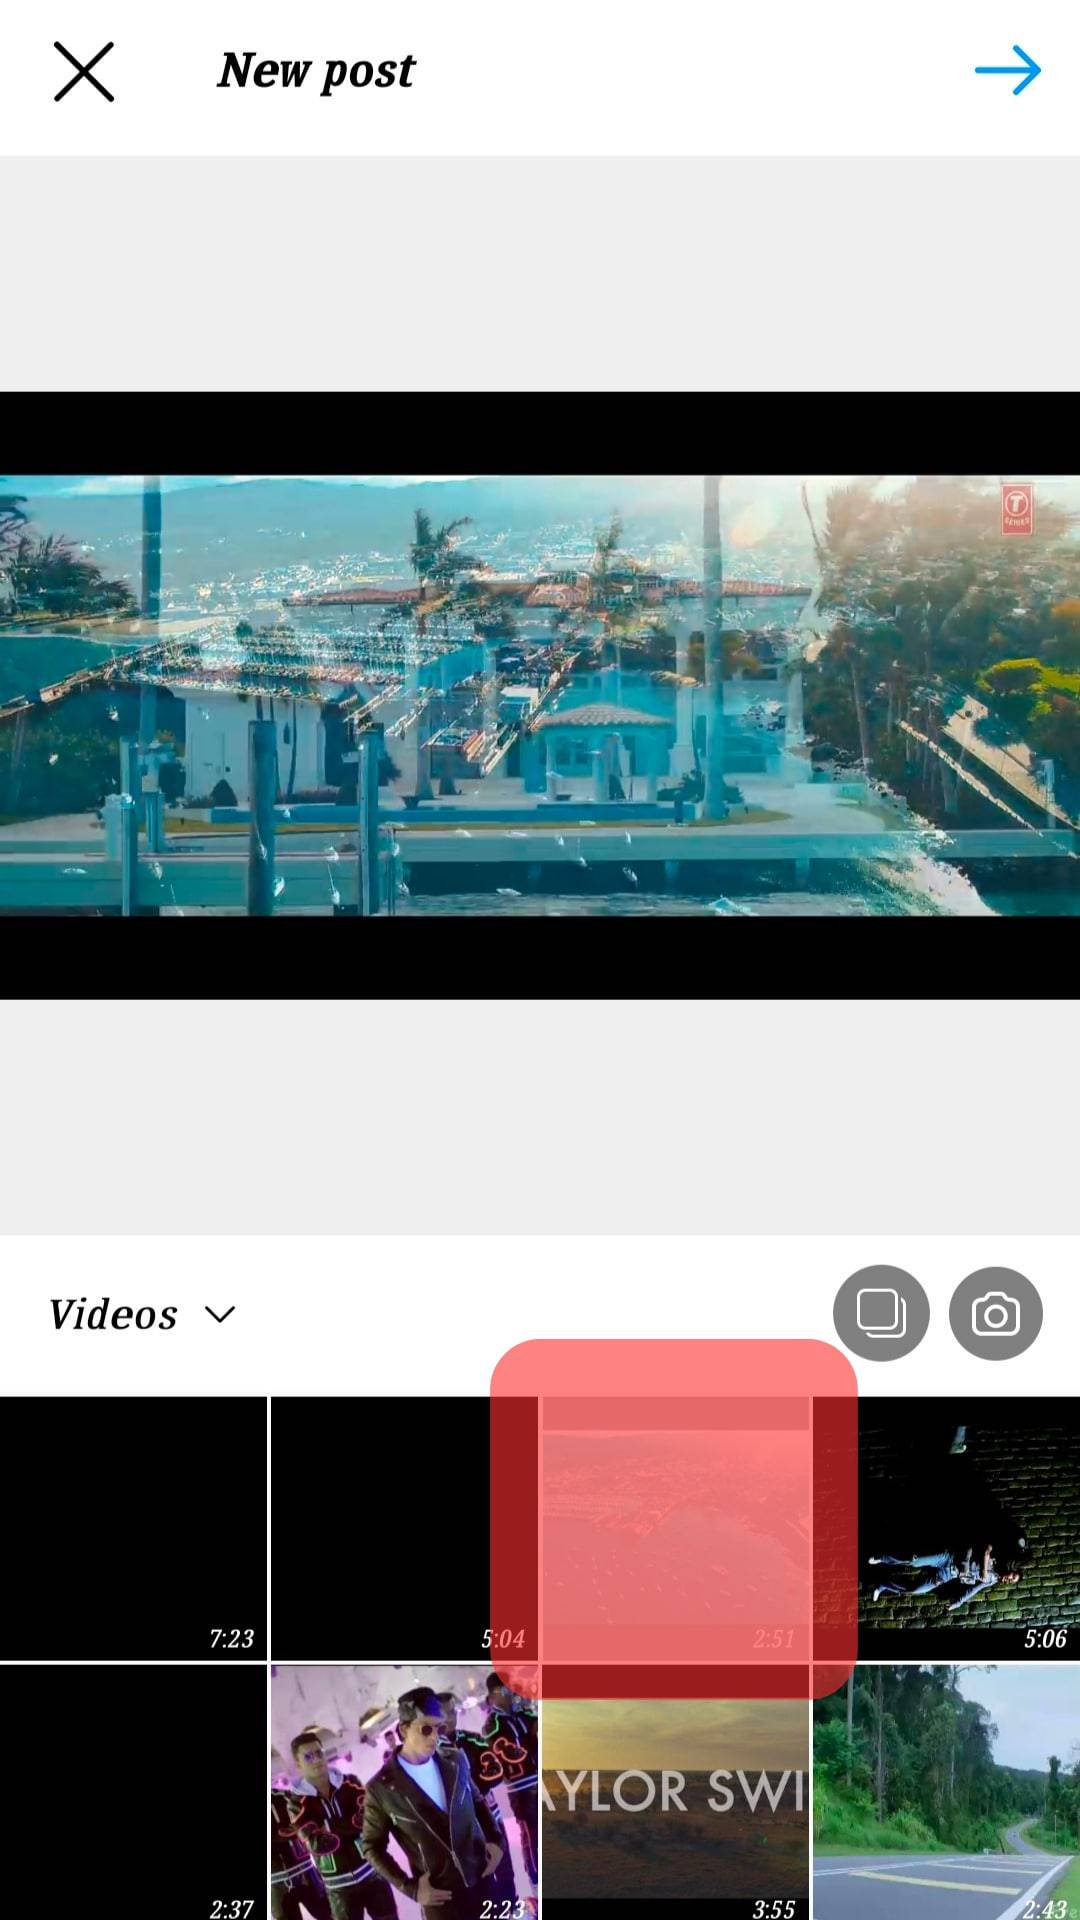 Select The Video You Want To Post.